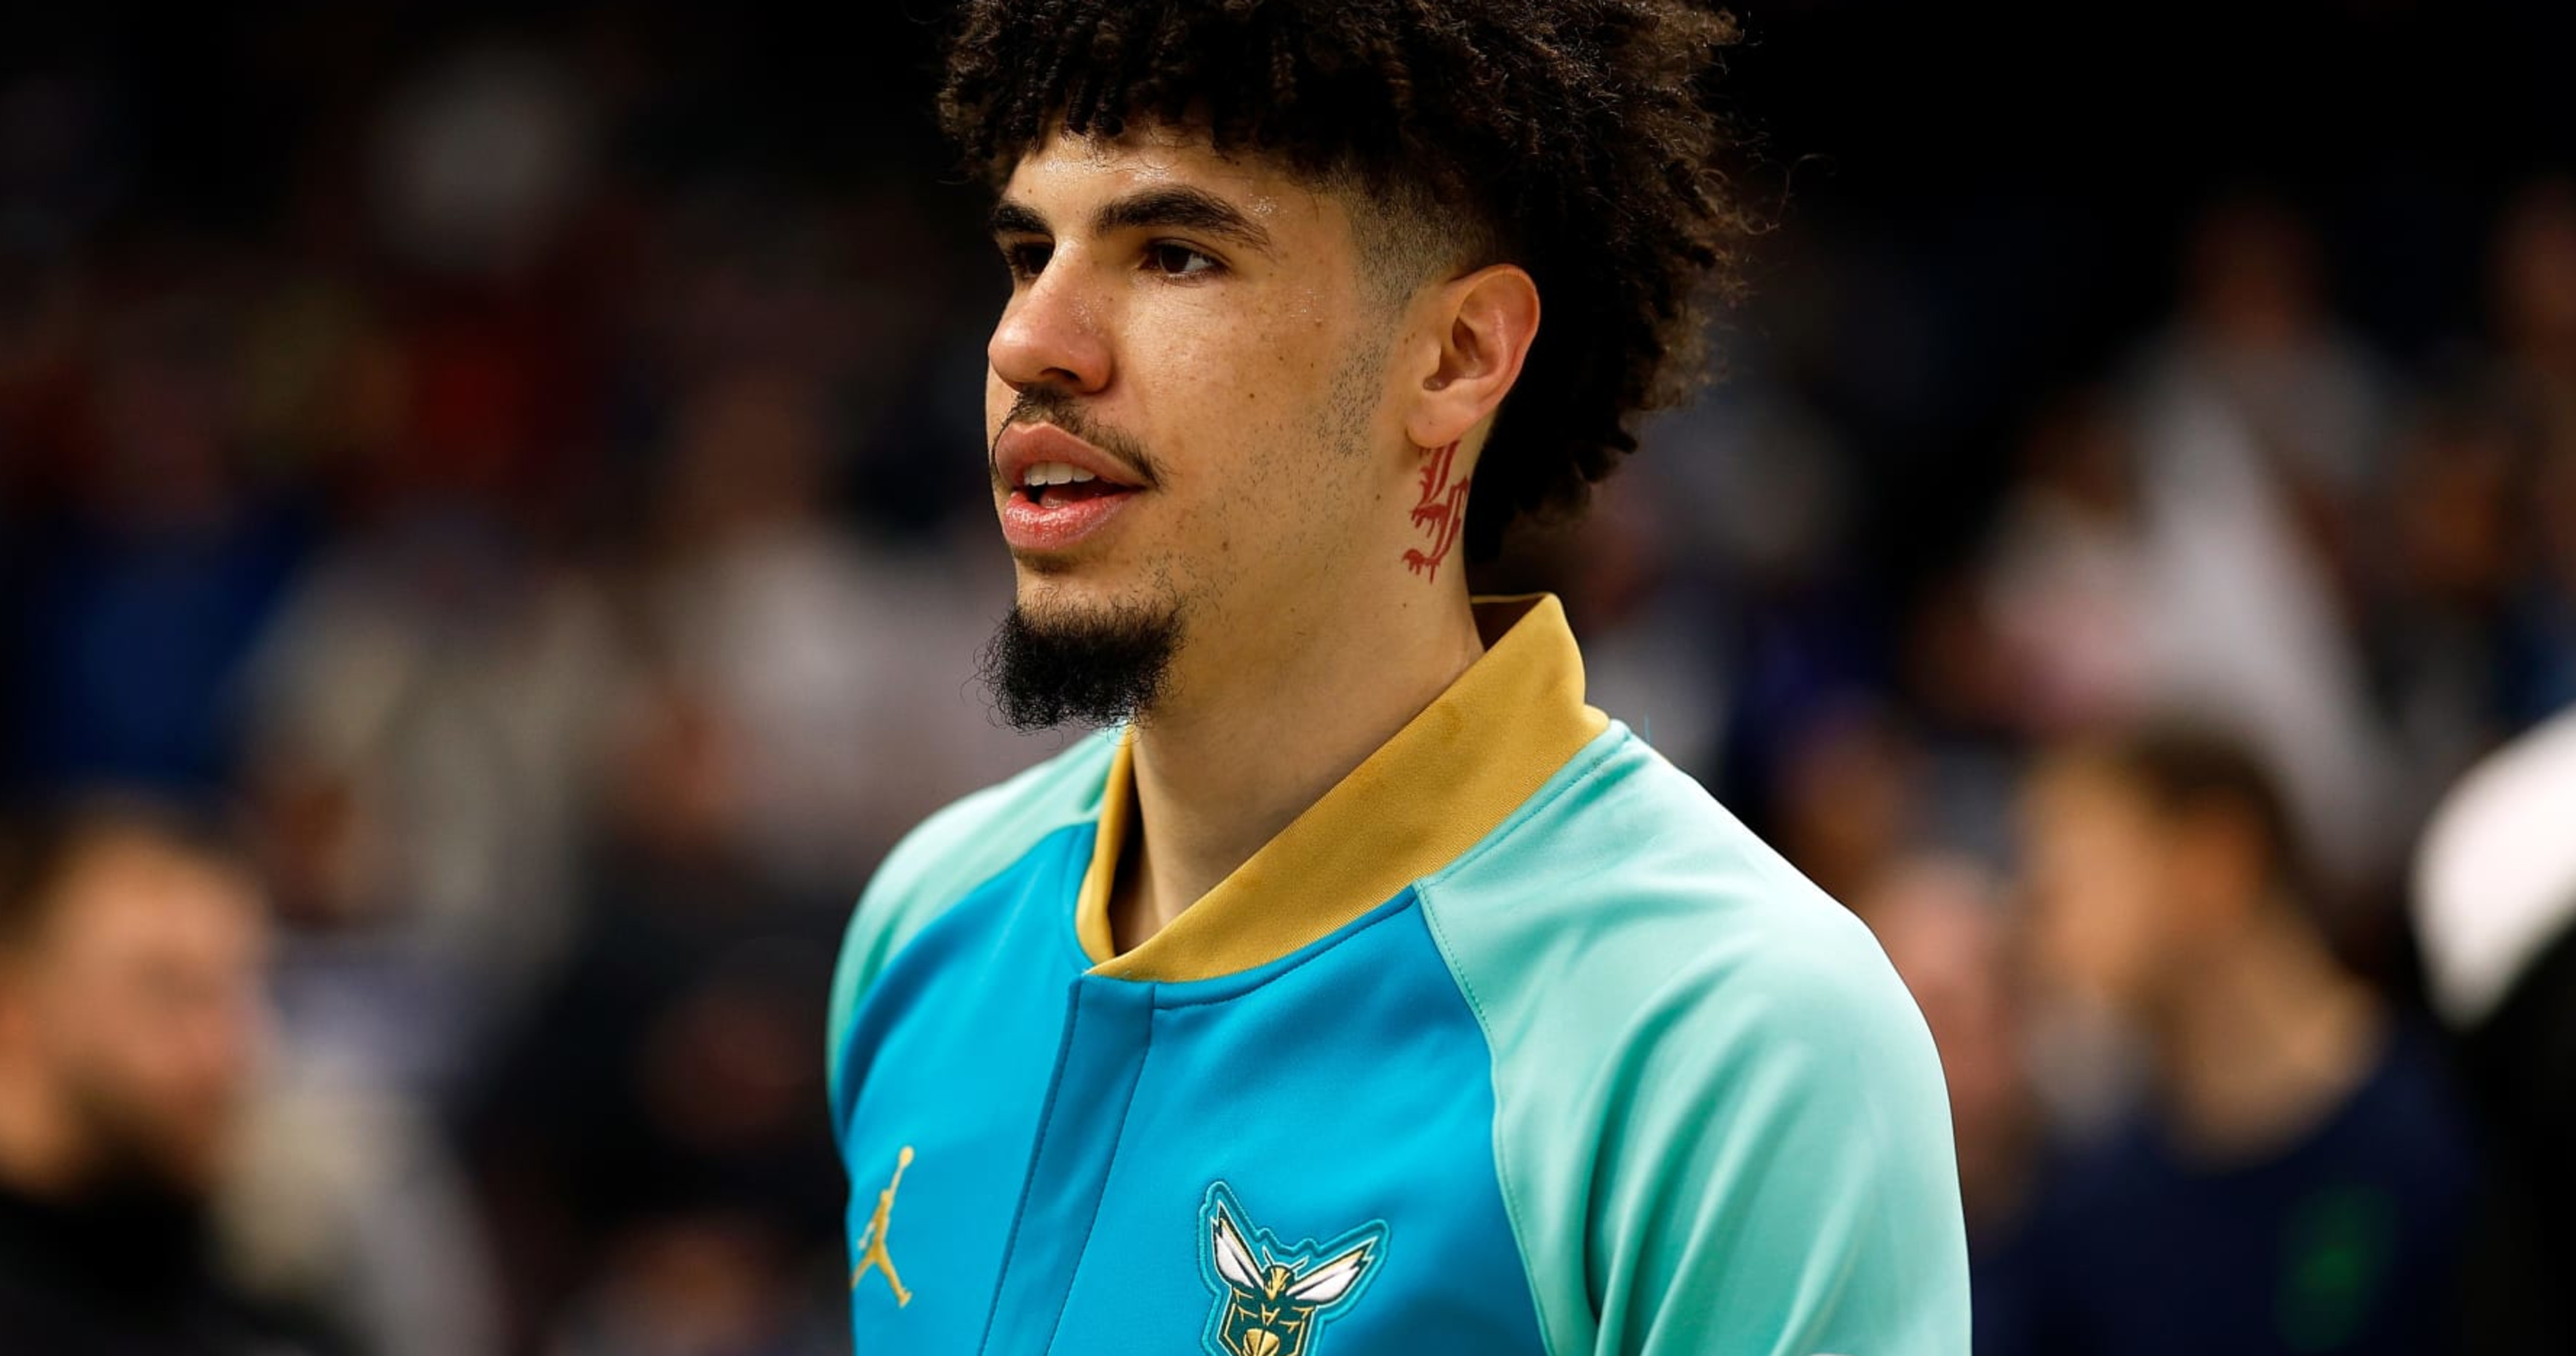 LaMelo Ball Out for Season with Ankle Injury as Hornets Eliminated from NBA Playoffs